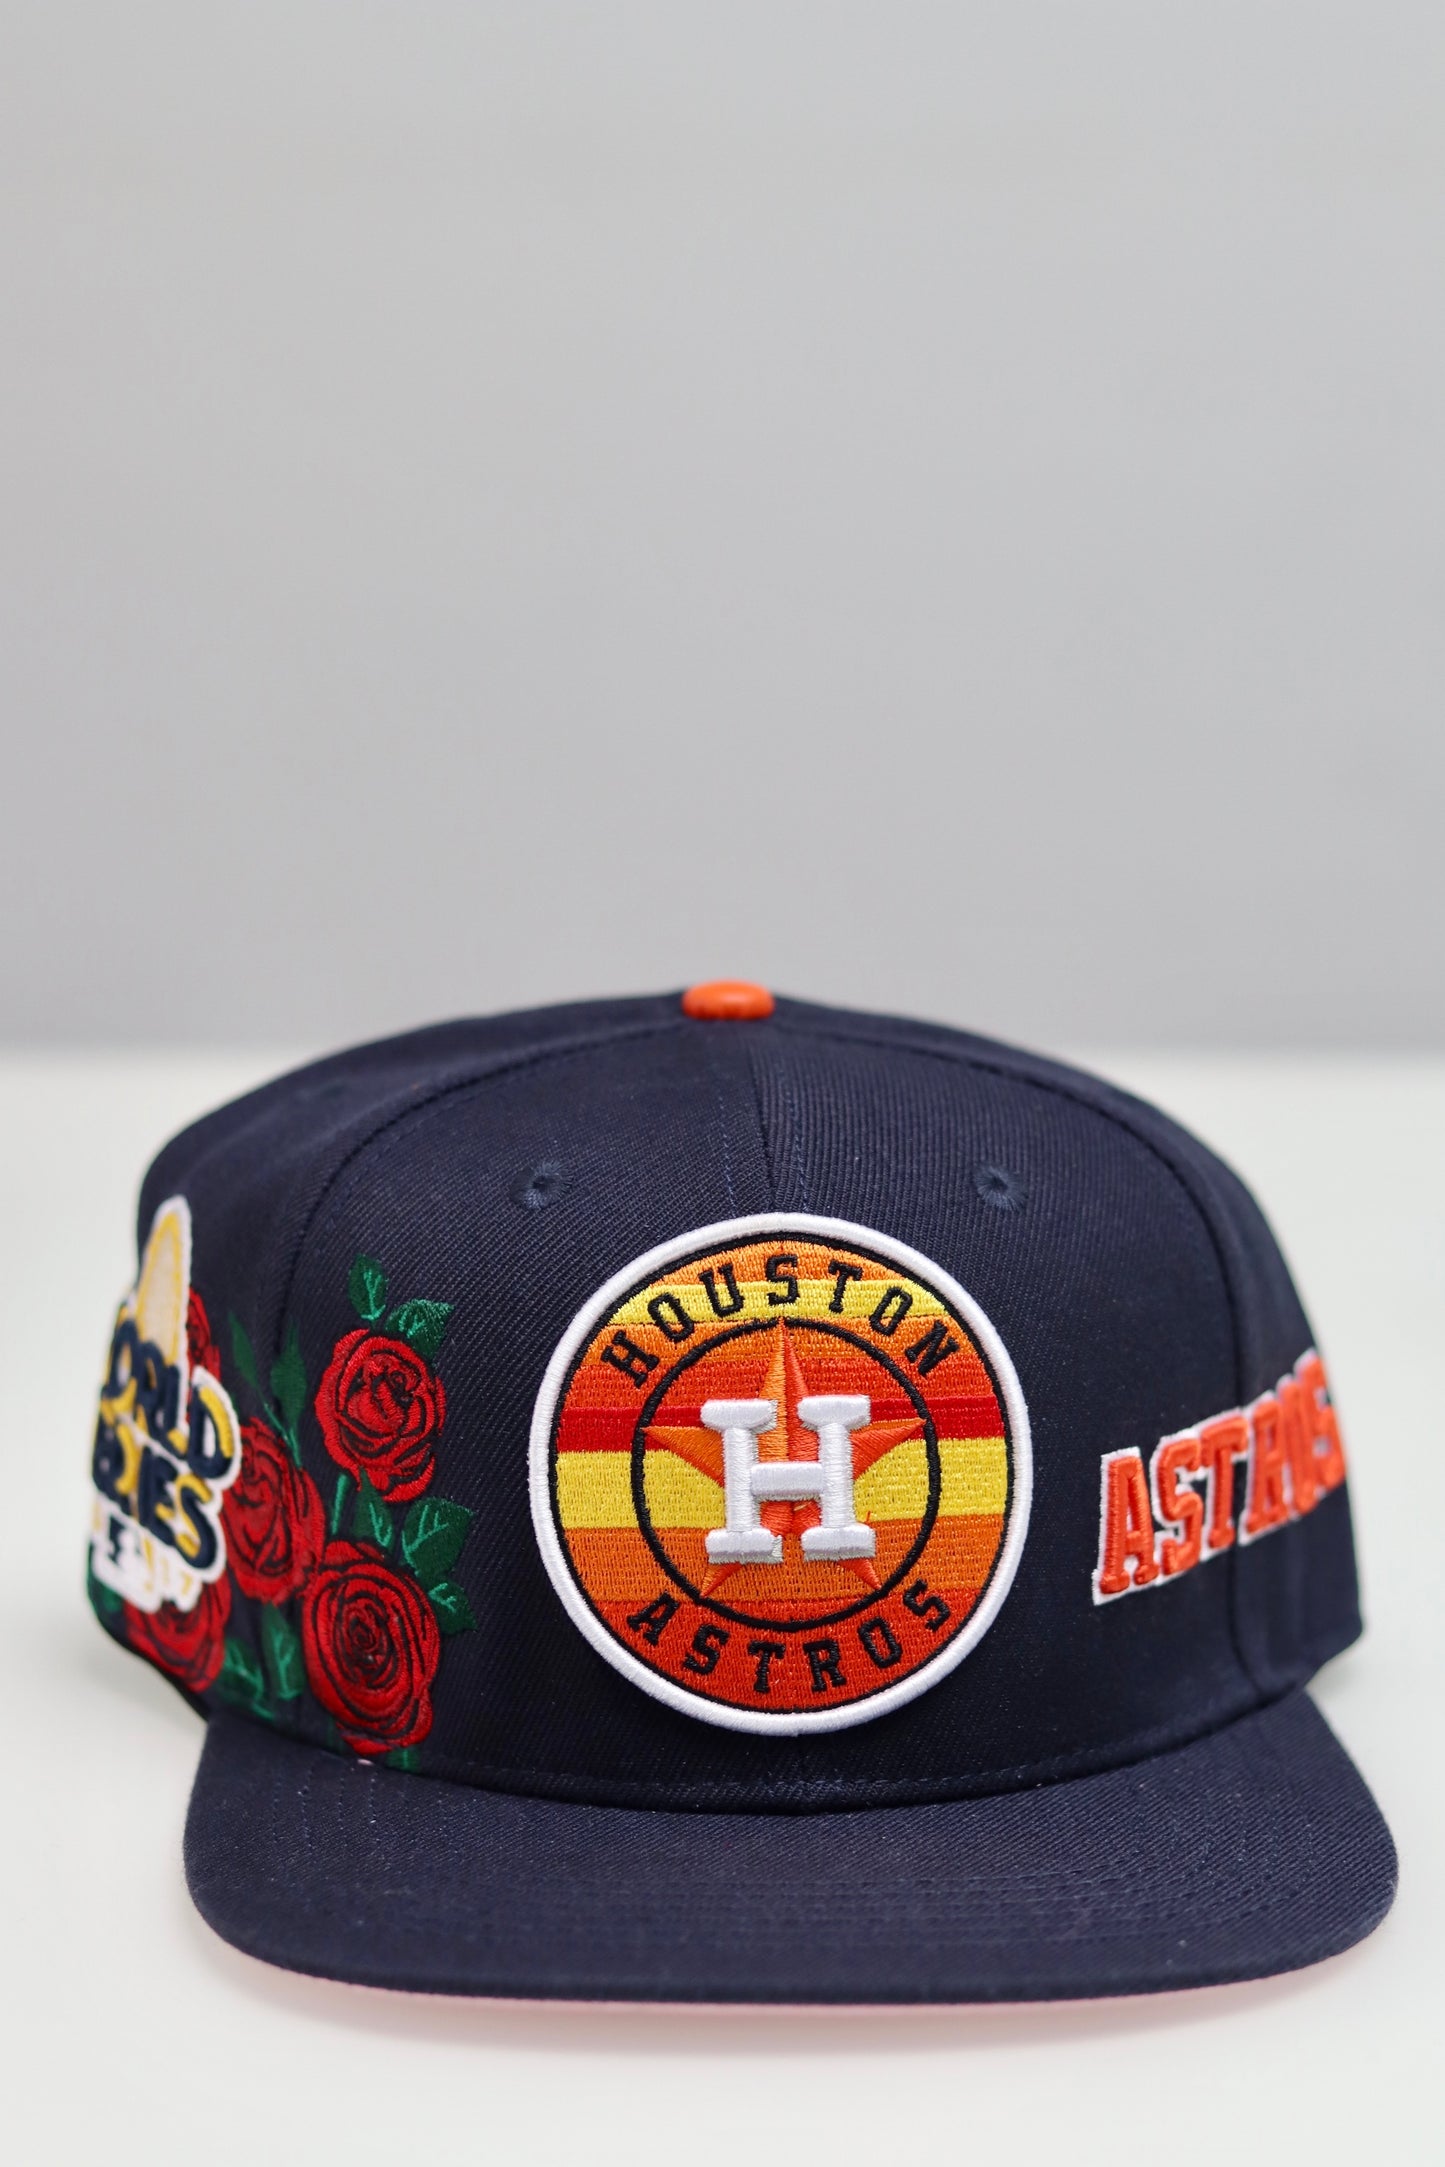 HOUSTON ASTROS ROSE EMBROIDERY SNAPBACK